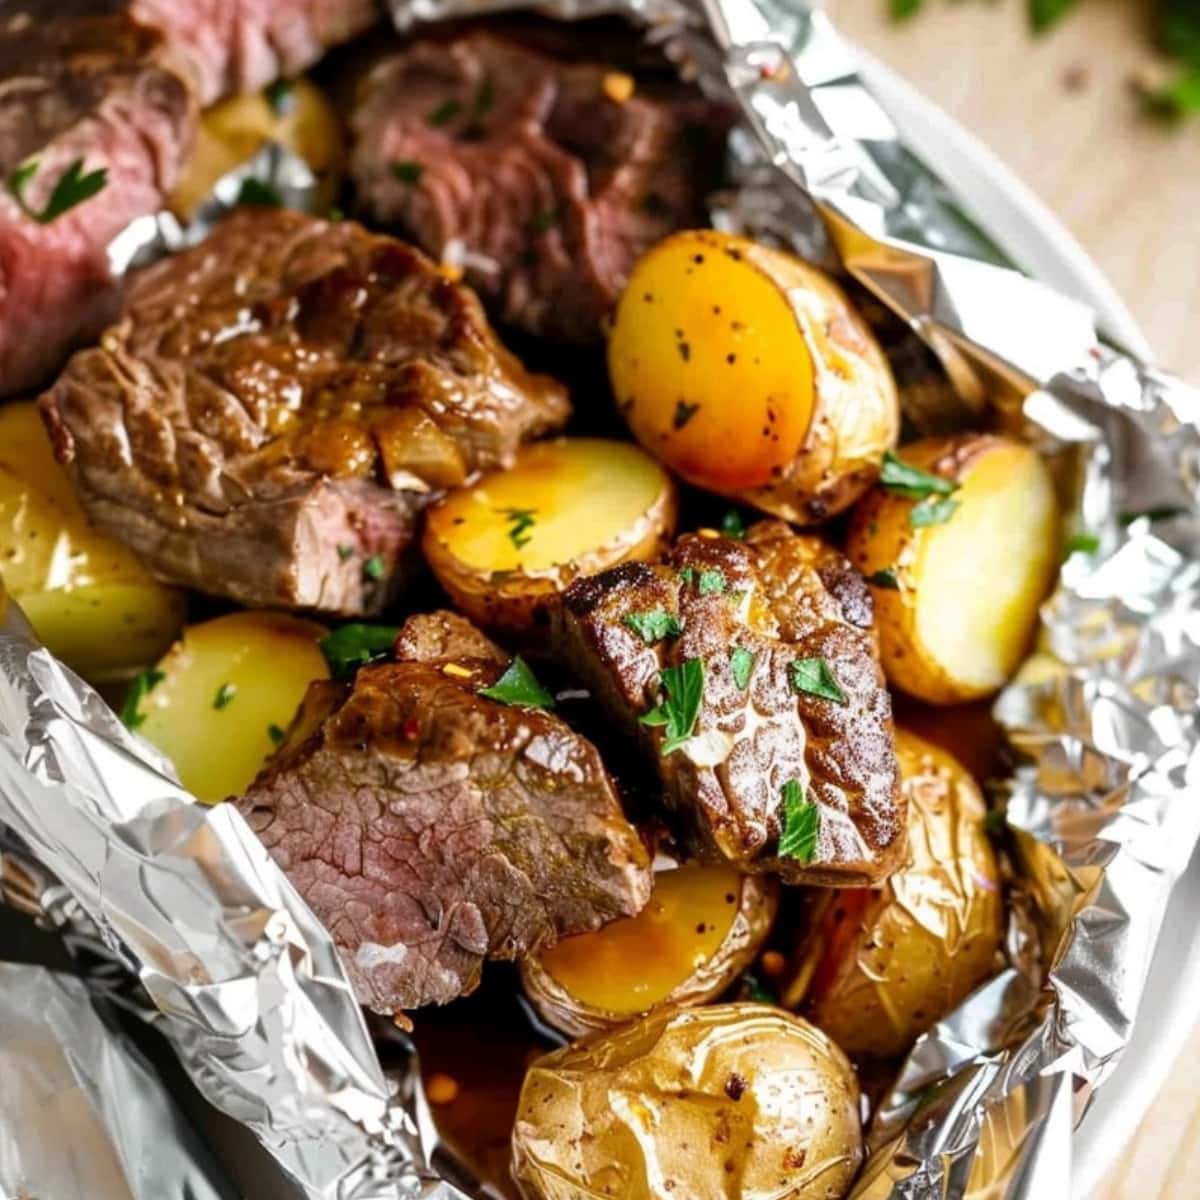 Grilled steak and baby potatoes inside foil packet in a wooden board.